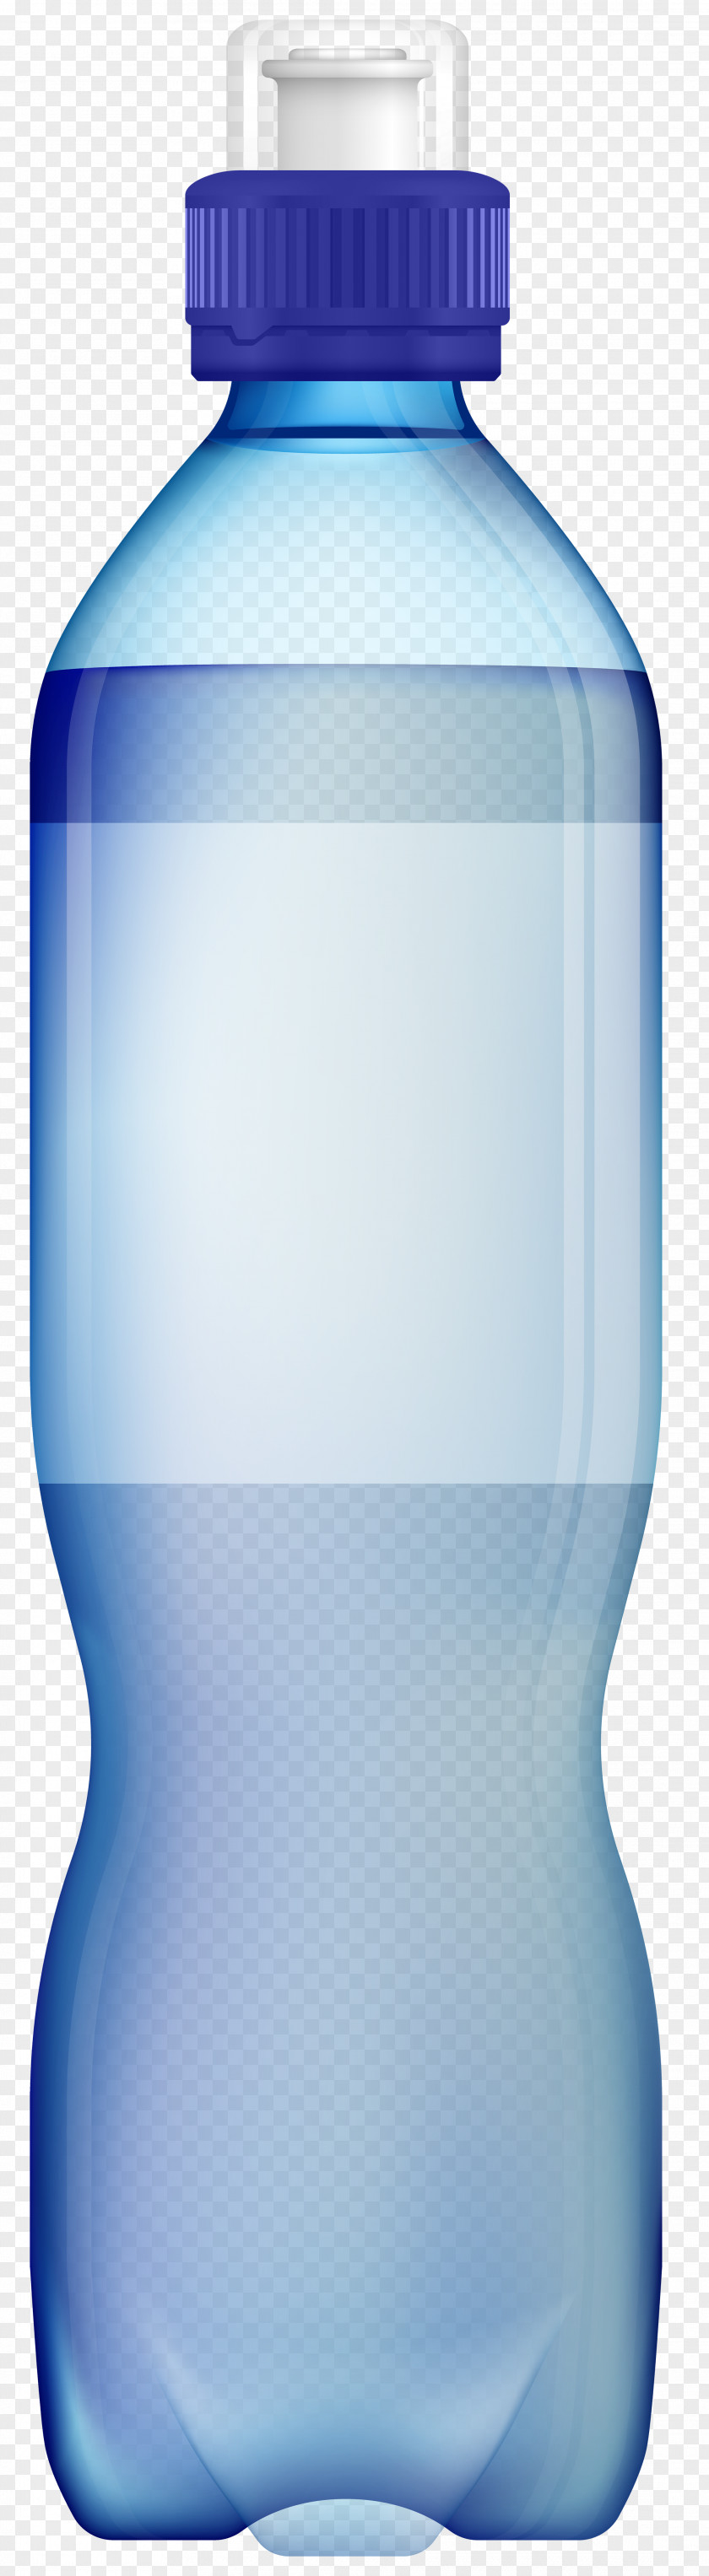 Mineral Water Bottle Clip Art PNG